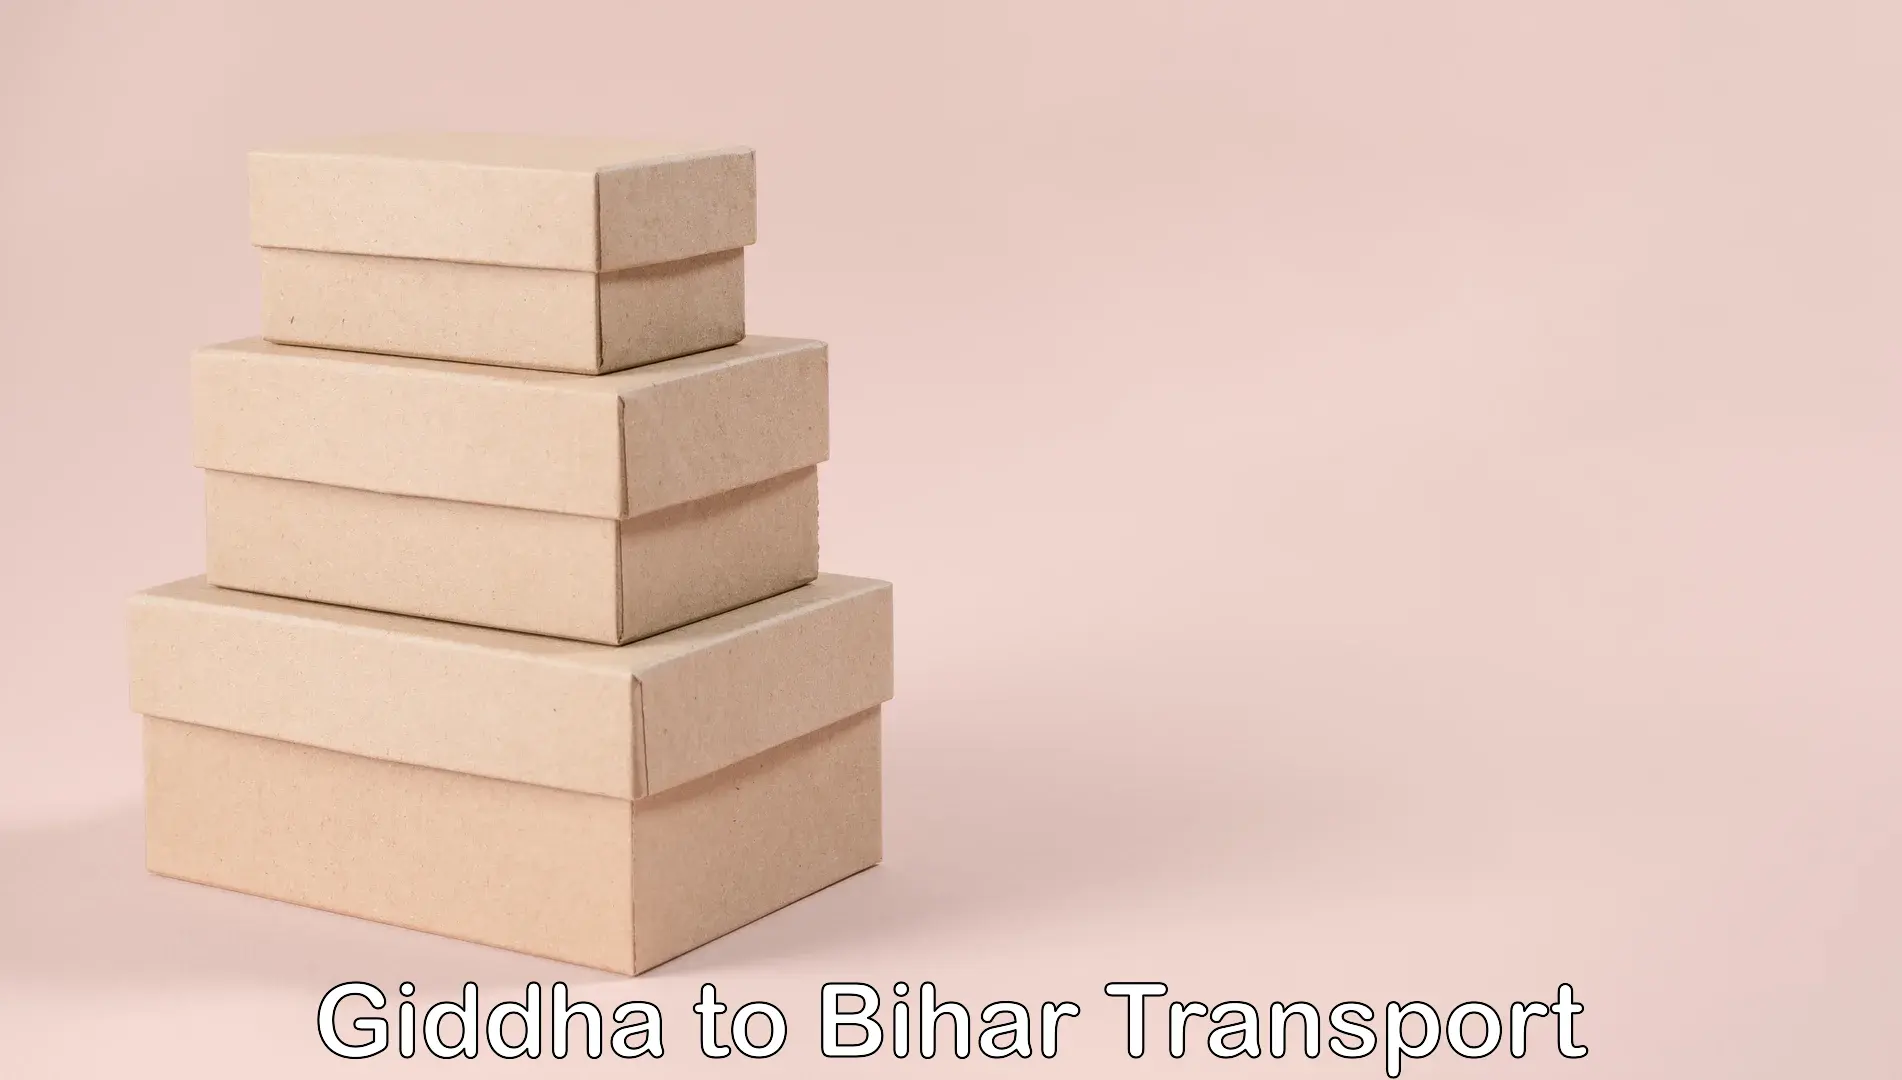 Commercial transport service Giddha to Mahaddipur